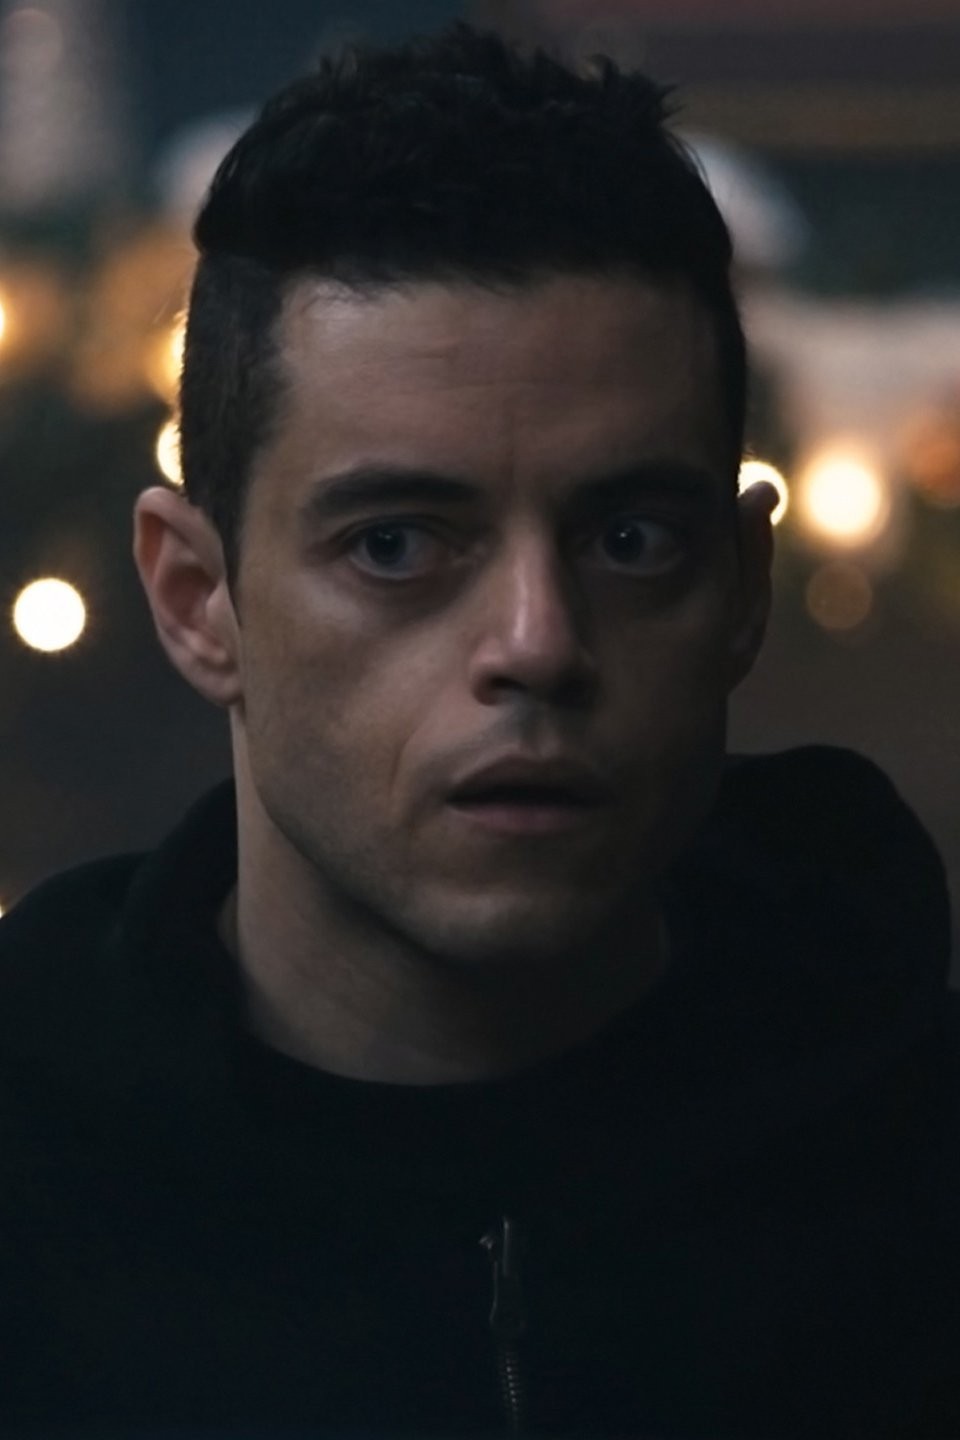 Mr. Robot Season 4 Episode 2 Review: Payment Requested - TV Fanatic